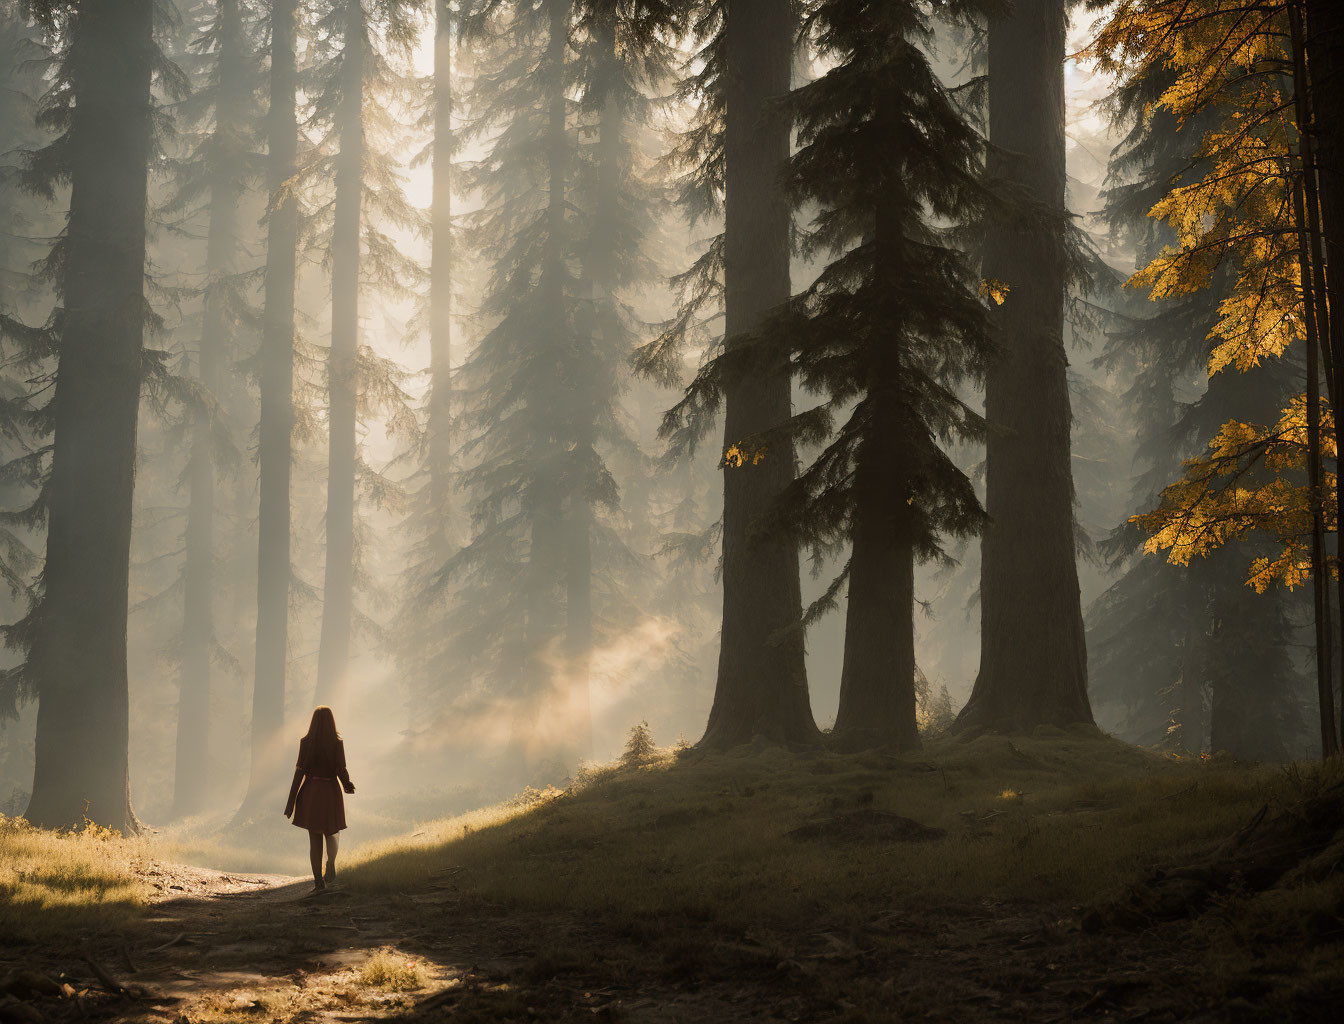 Person in red dress walking in sunlit forest with misty air